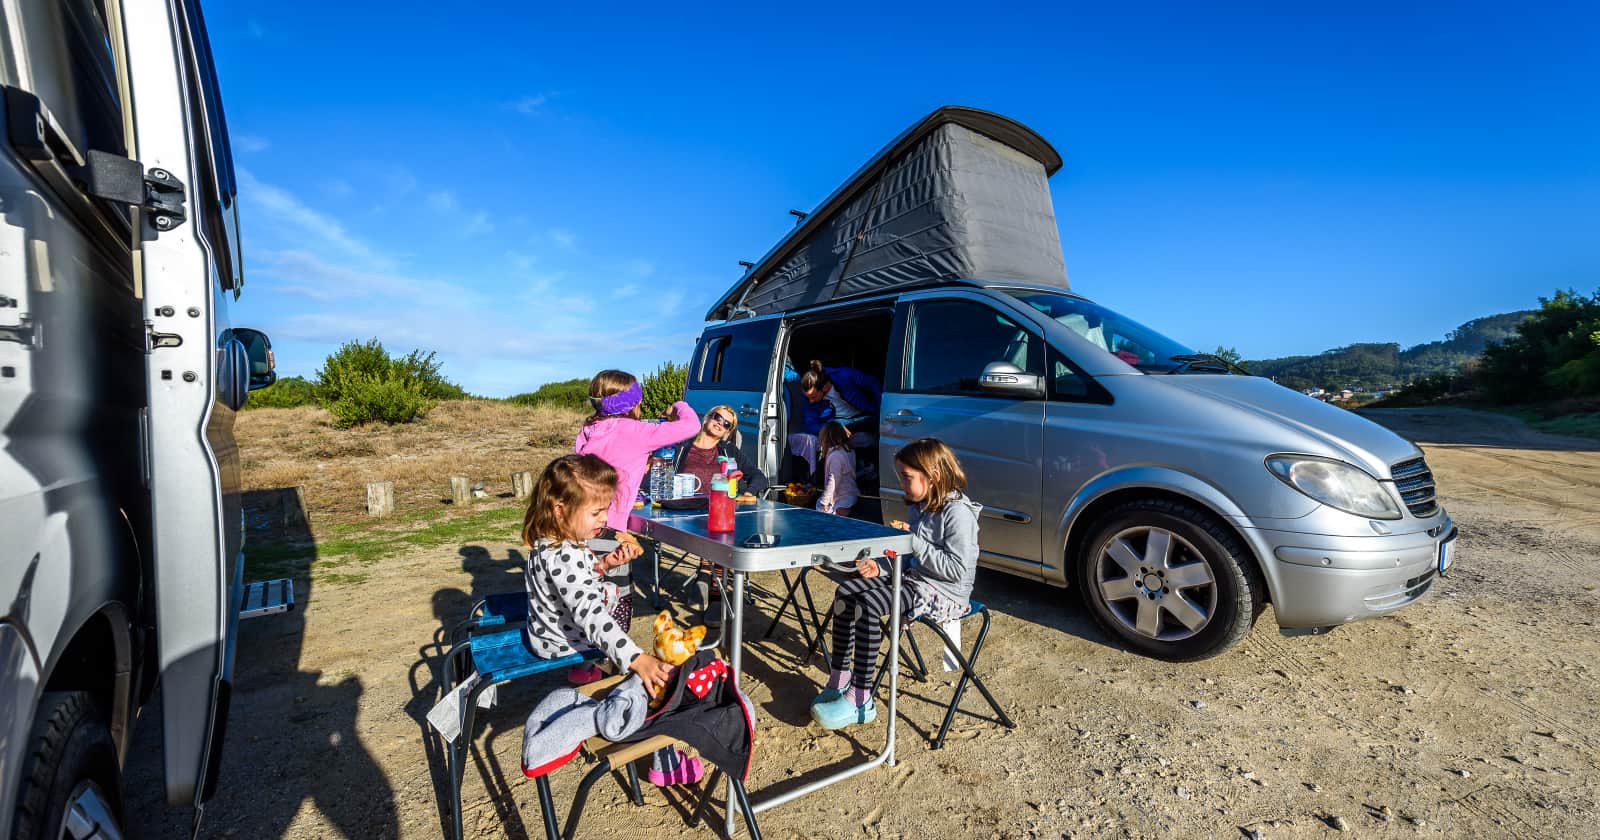 Family on vacation is sitting outsides of their camper van on camping chairs and table eating breakfast and other road trip snacks